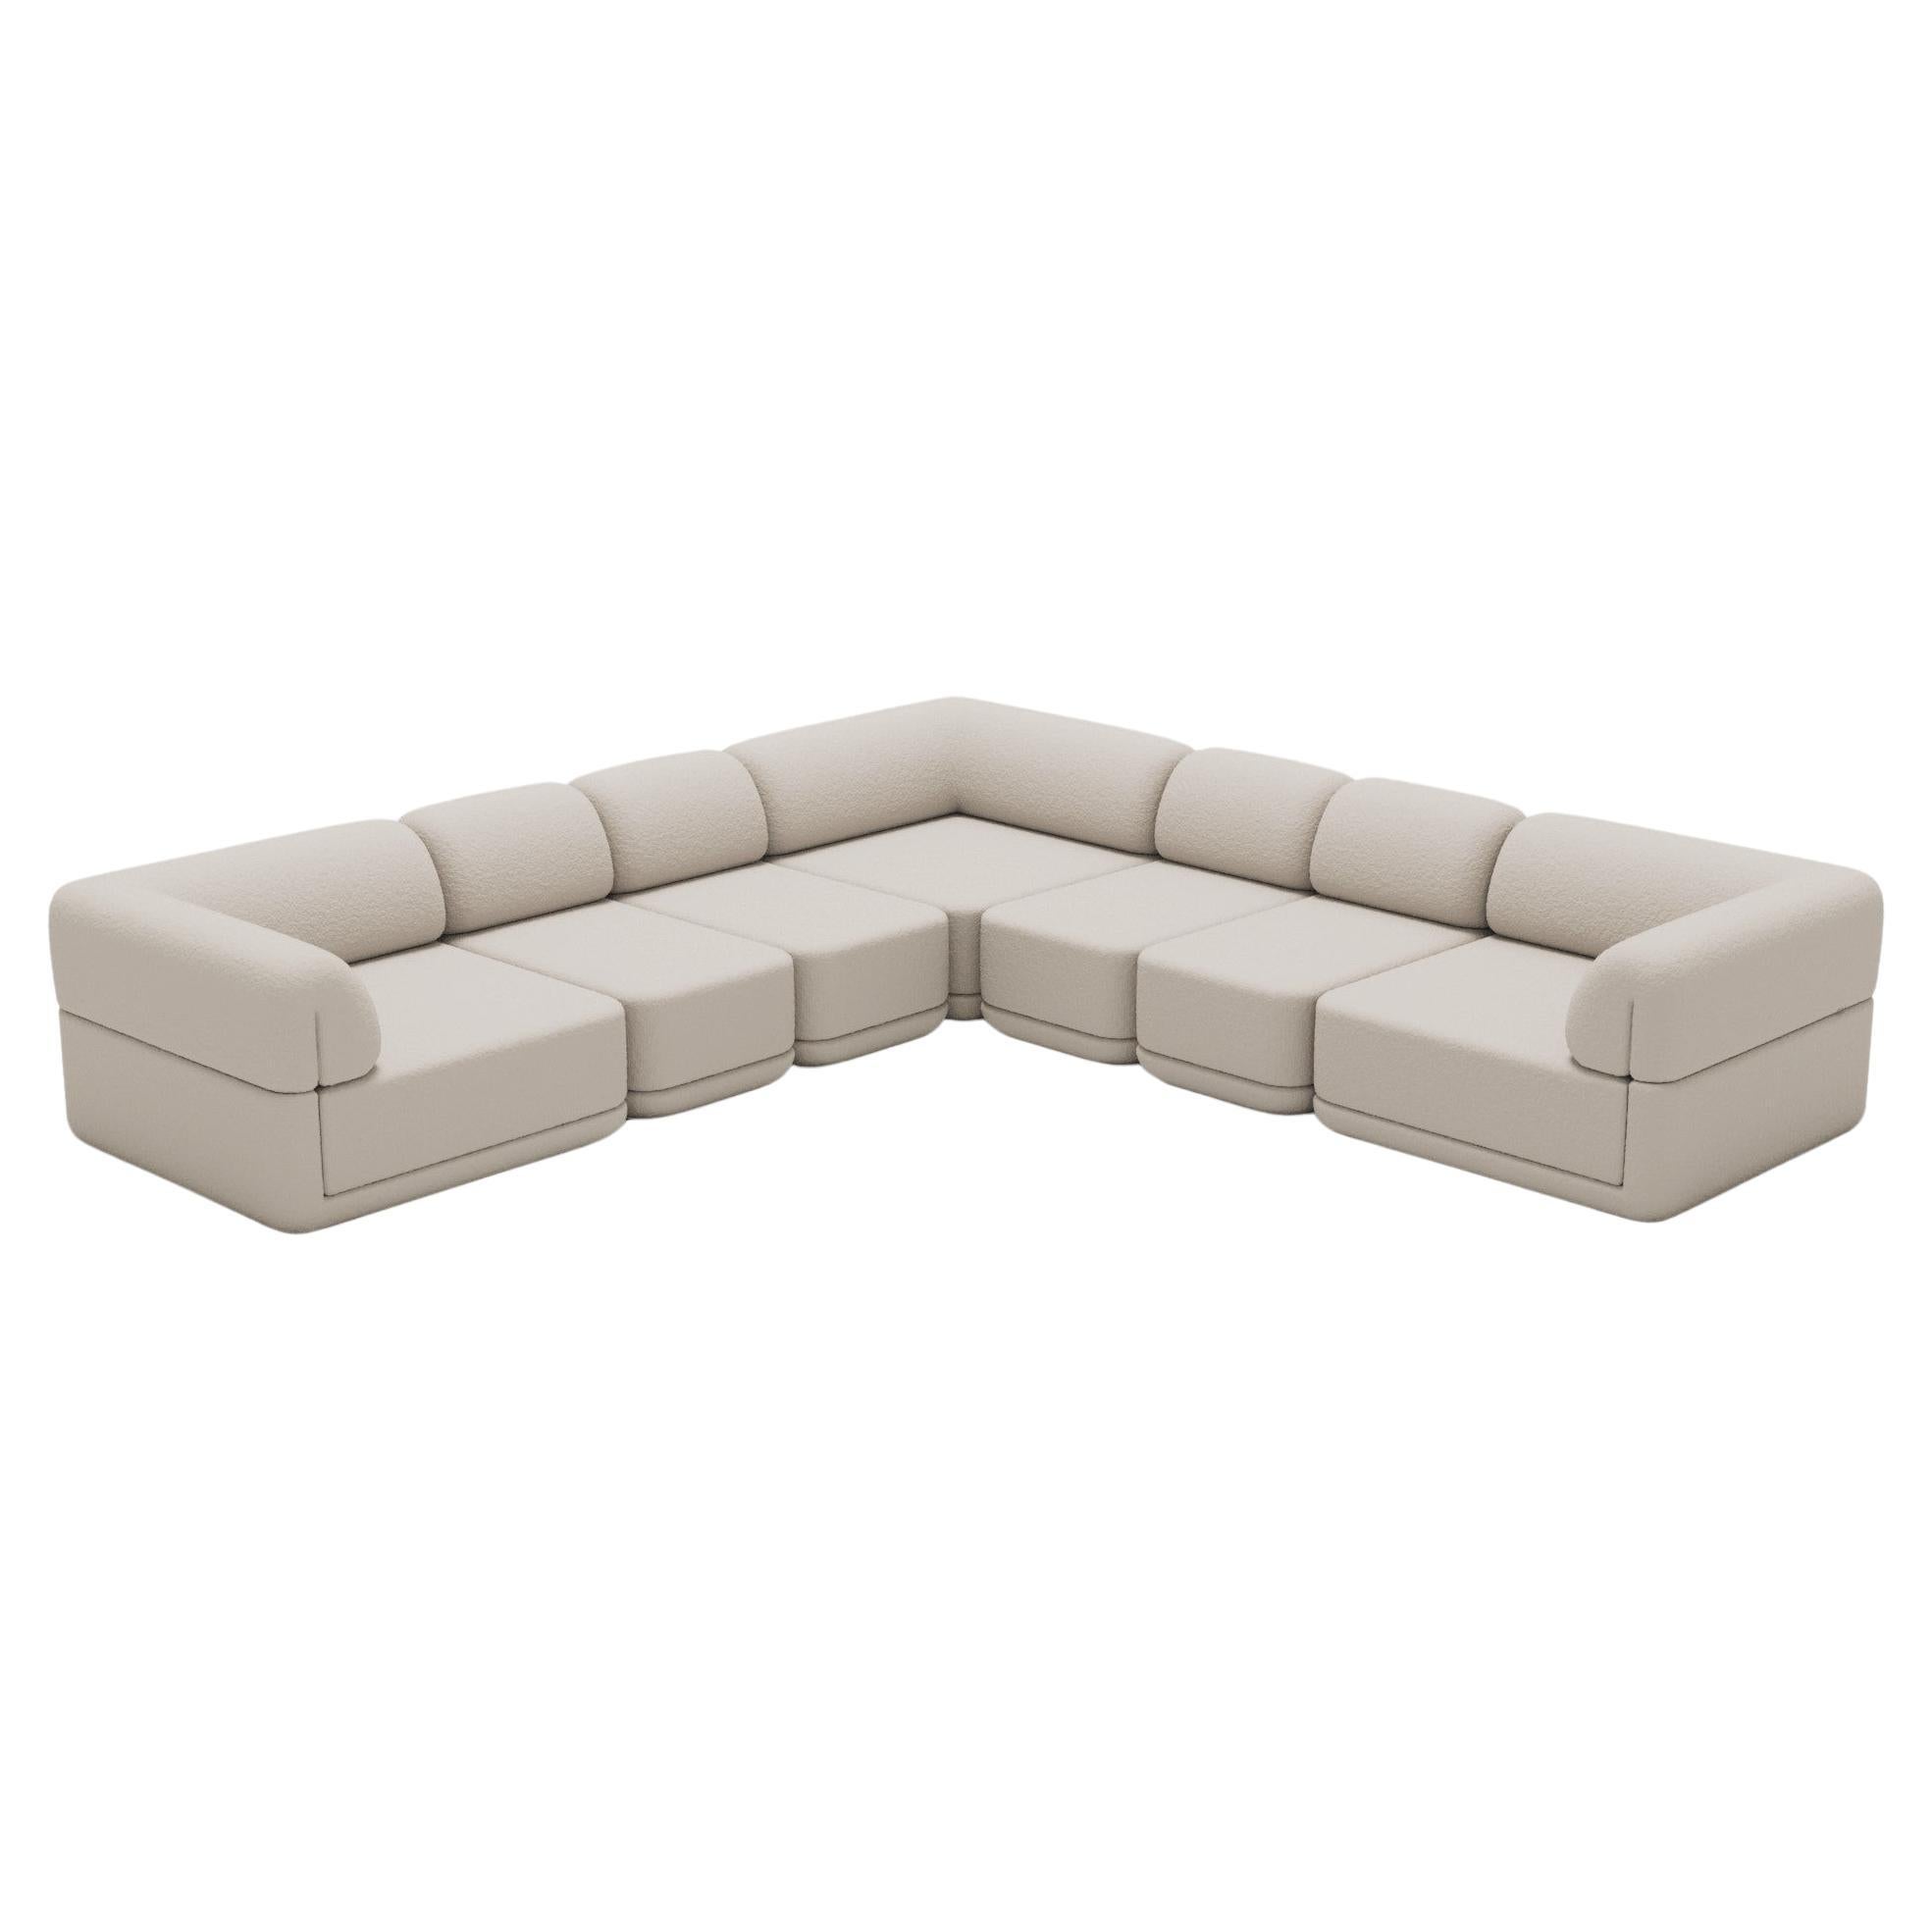 The Cube Sofa - Corner Slim Sectional For Sale